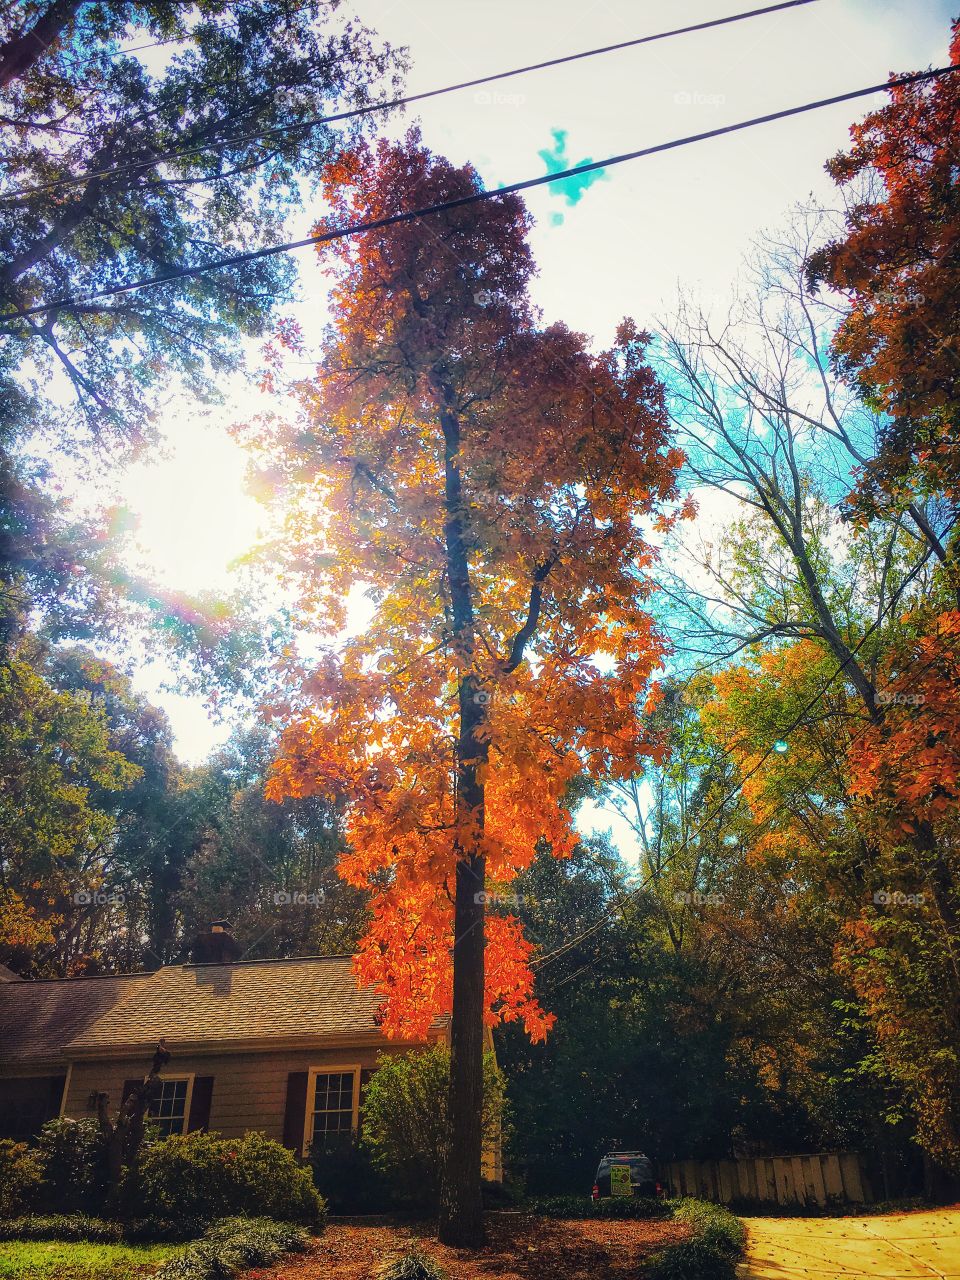 Colorful trees in Fall/Autumn.